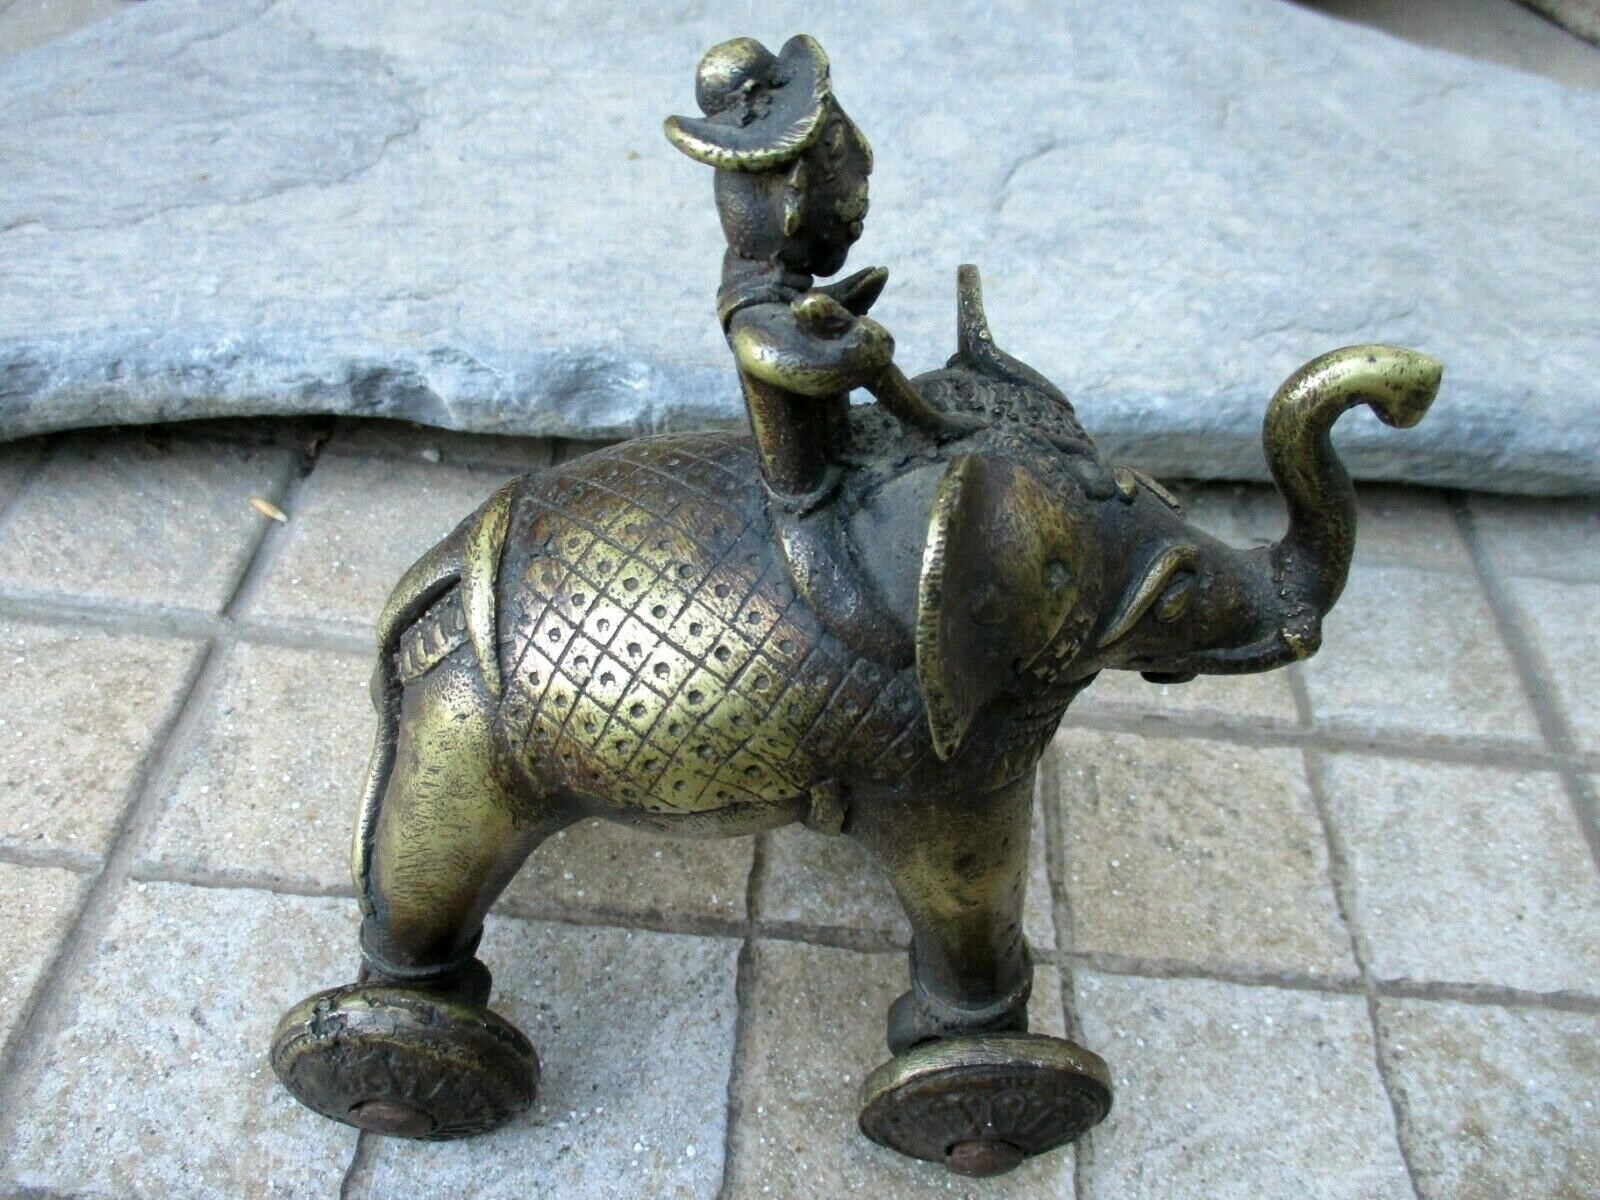 Antique Toy 18th Century Rare Solid Brass Elephant Statue Figurine With Wheels 